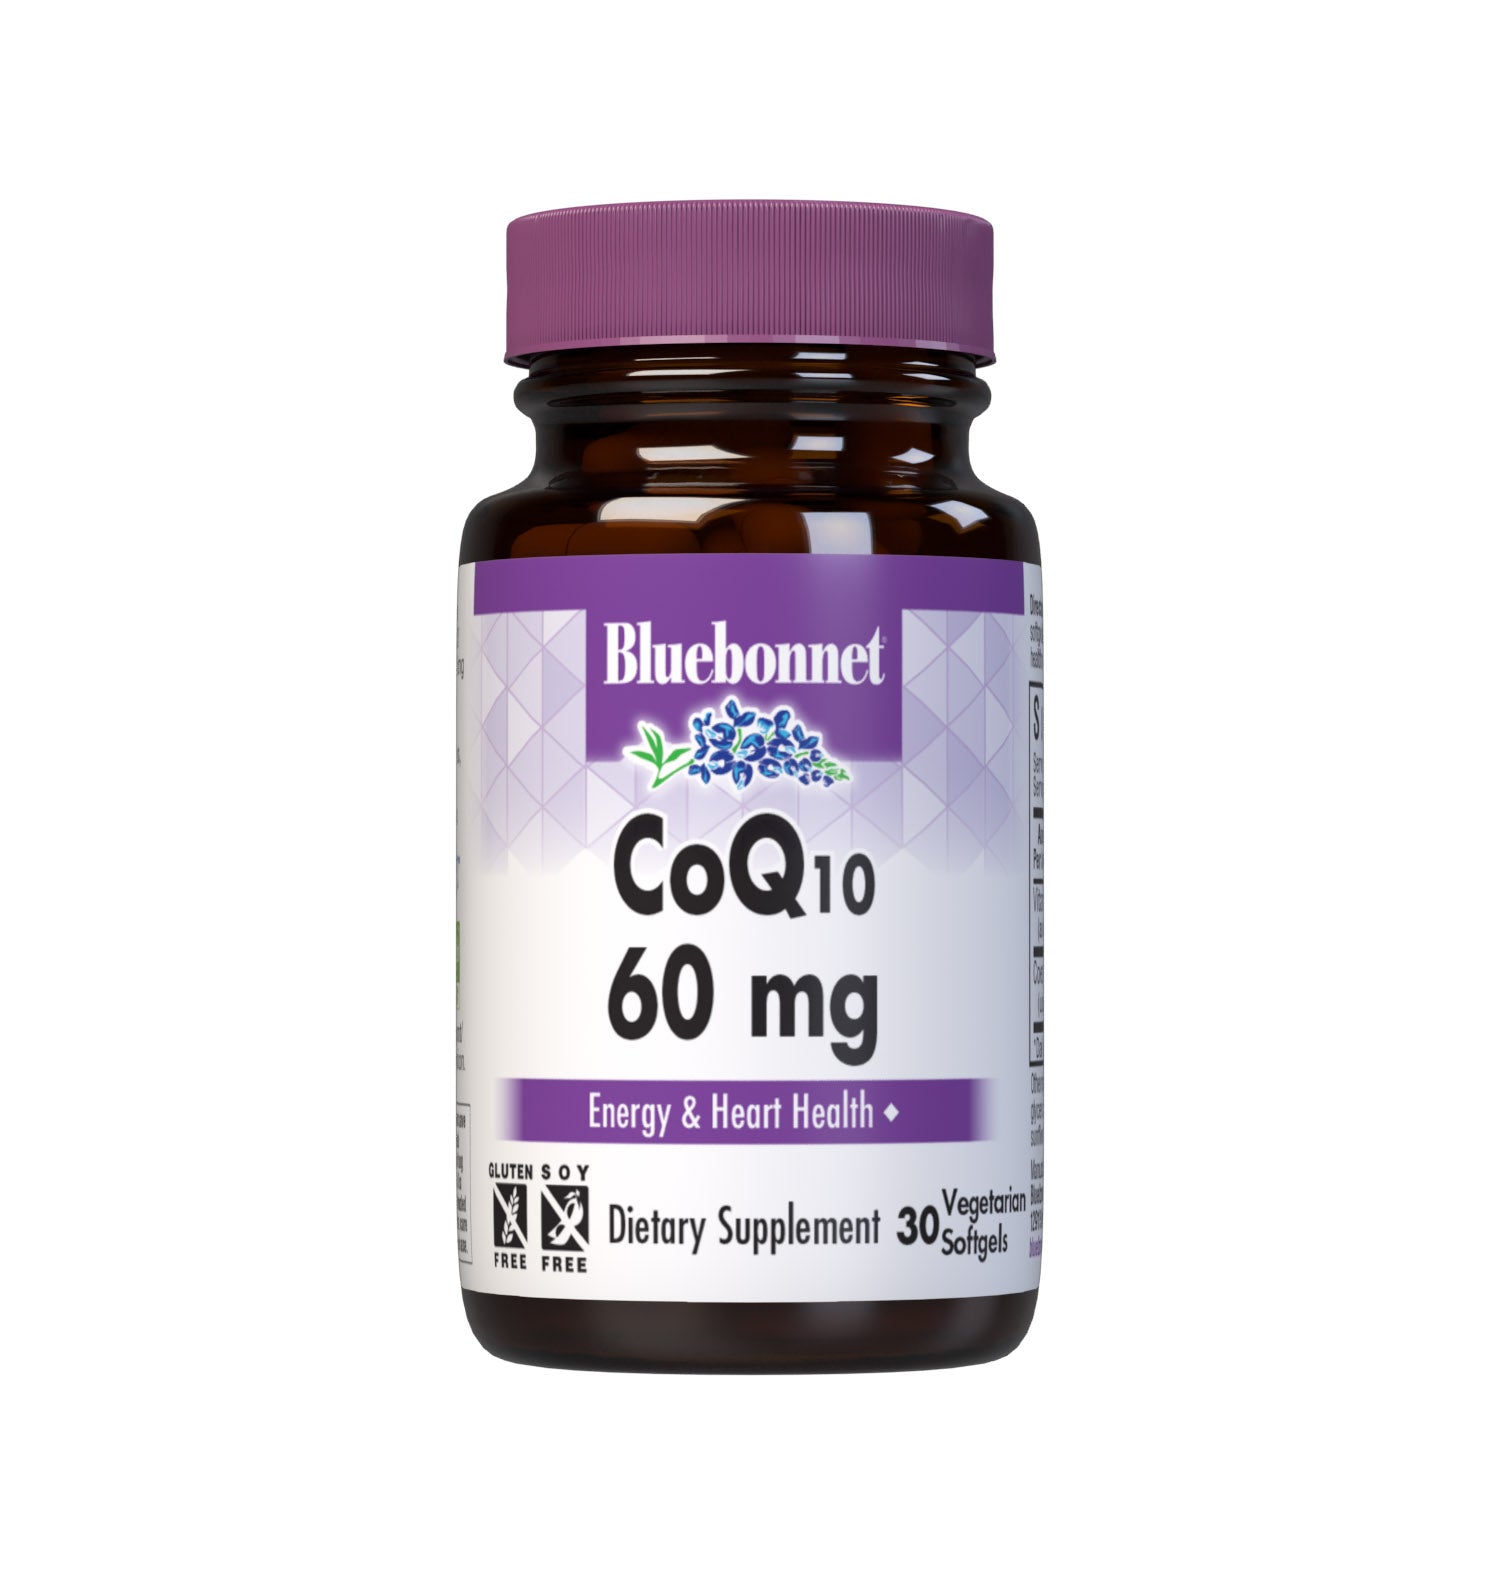 Bluebonnet’s CoQ10 60 mg 30 Vegetarian Softgels are formulated with the “trans-isomer” form of ubiquinone from Kaneka, the world’s largest manufacturer of premium-quality Coenzyme Q-10, in a base of non-GMO sunflower oil plus vitamin E to enhance stability. CoQ10 promotes antioxidant protection and cardiovascular health. #size_30 count